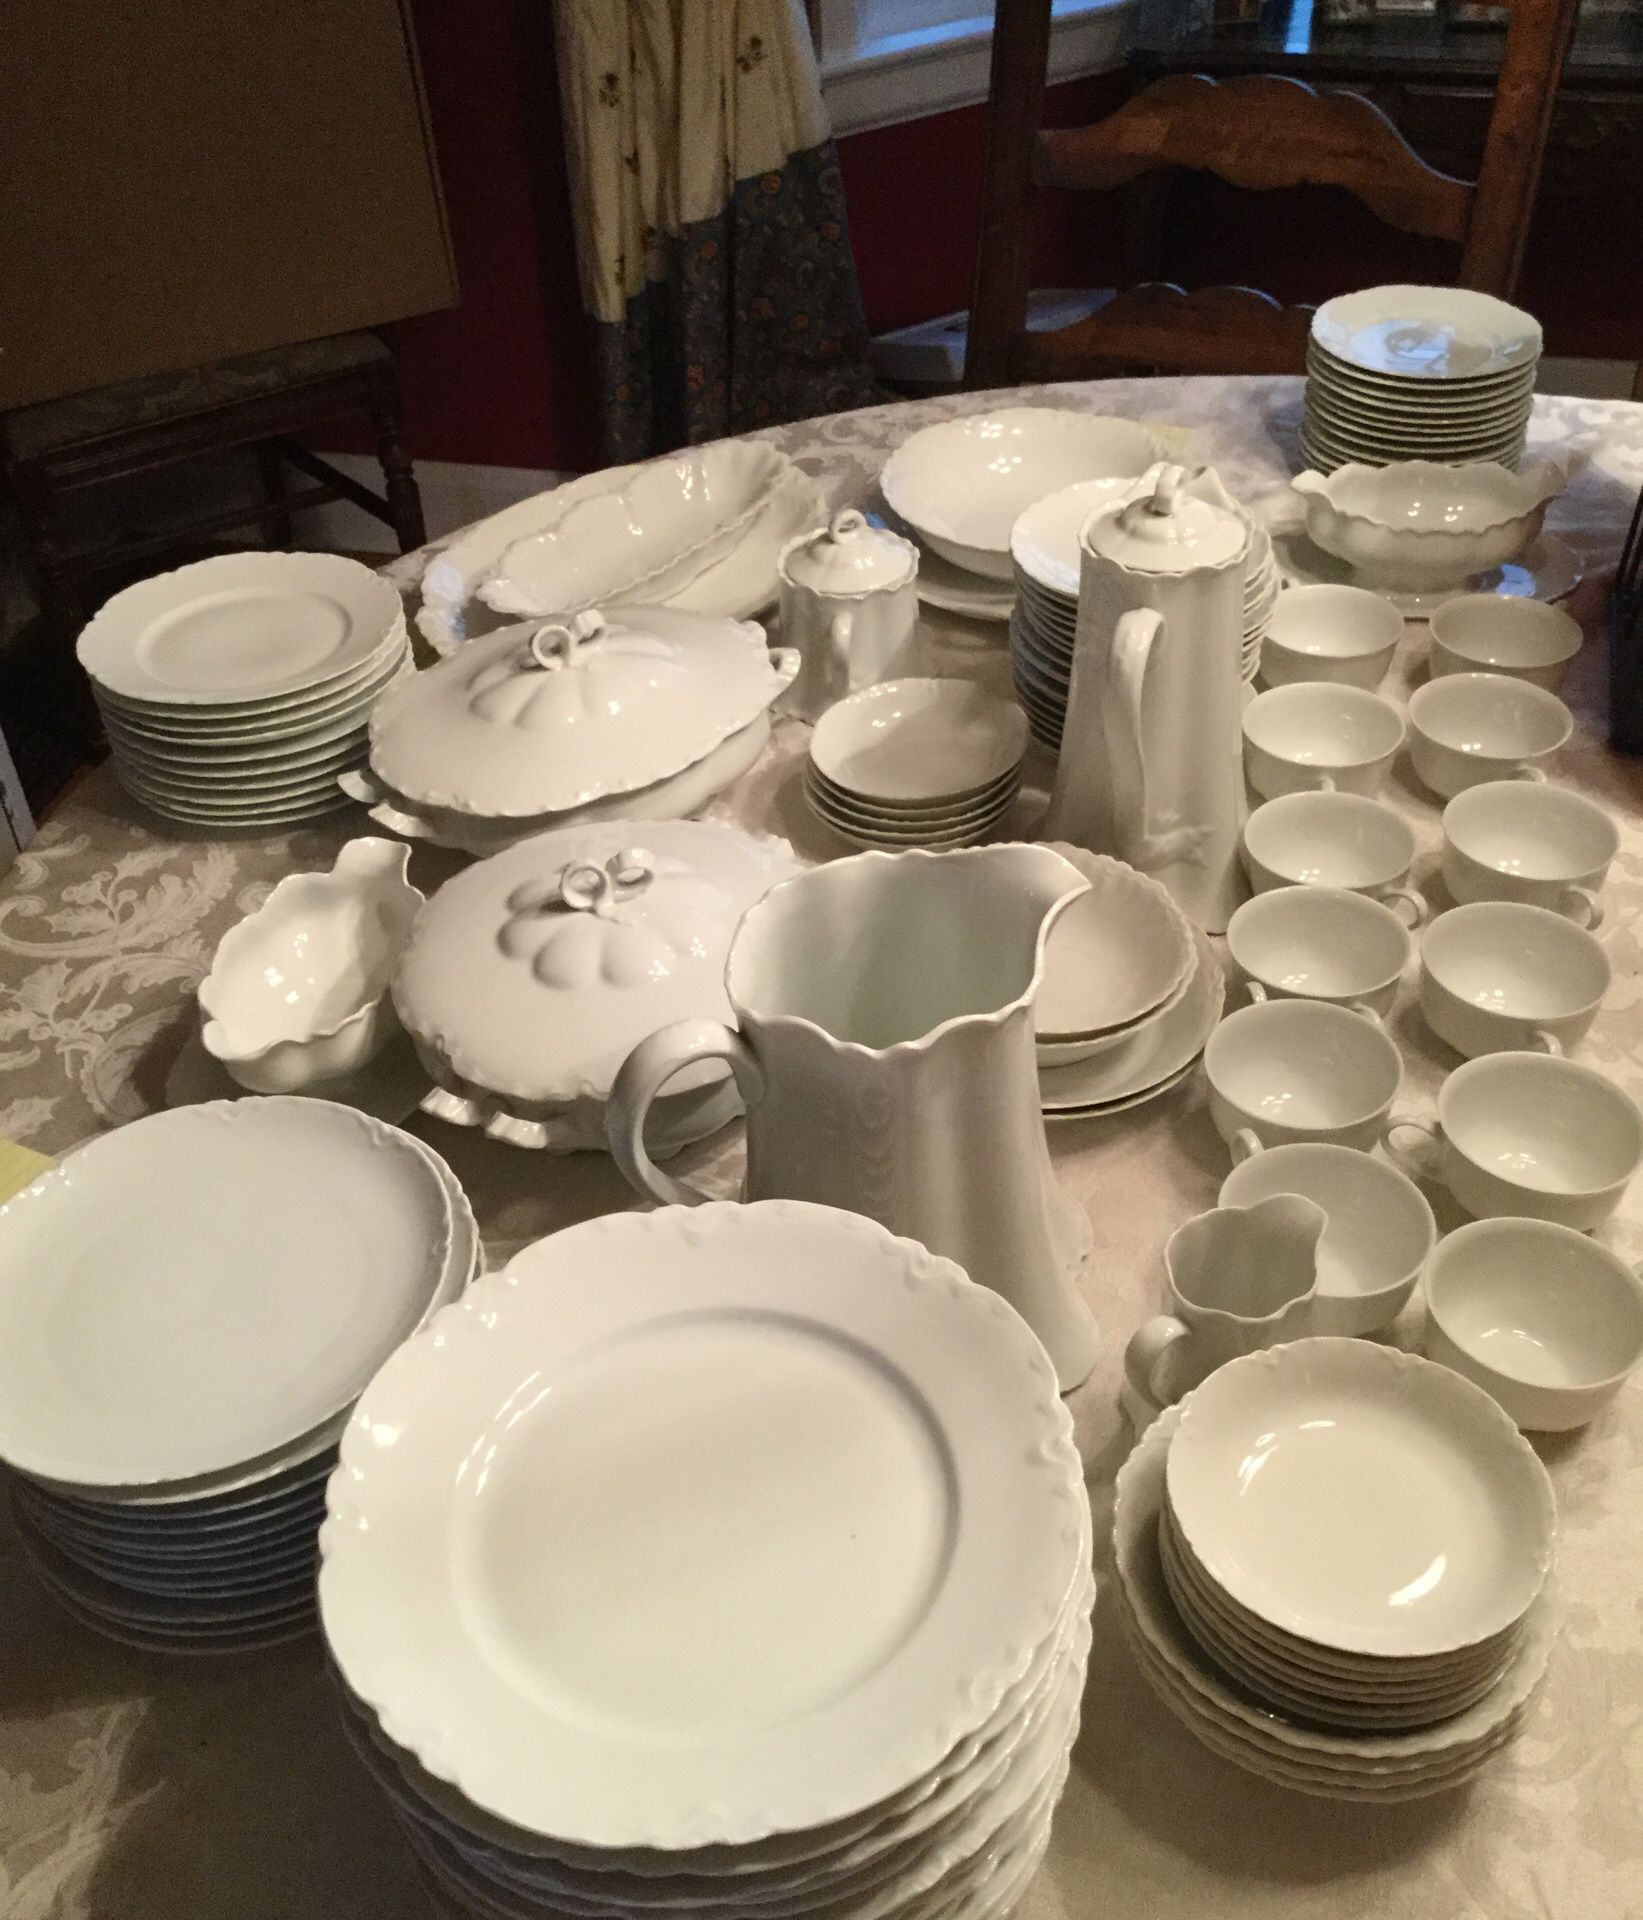 Beautiful antique collection of fine China from Austria, Germany, and France. In excellent condition. Some pieces, such as the pitcher, are worth o